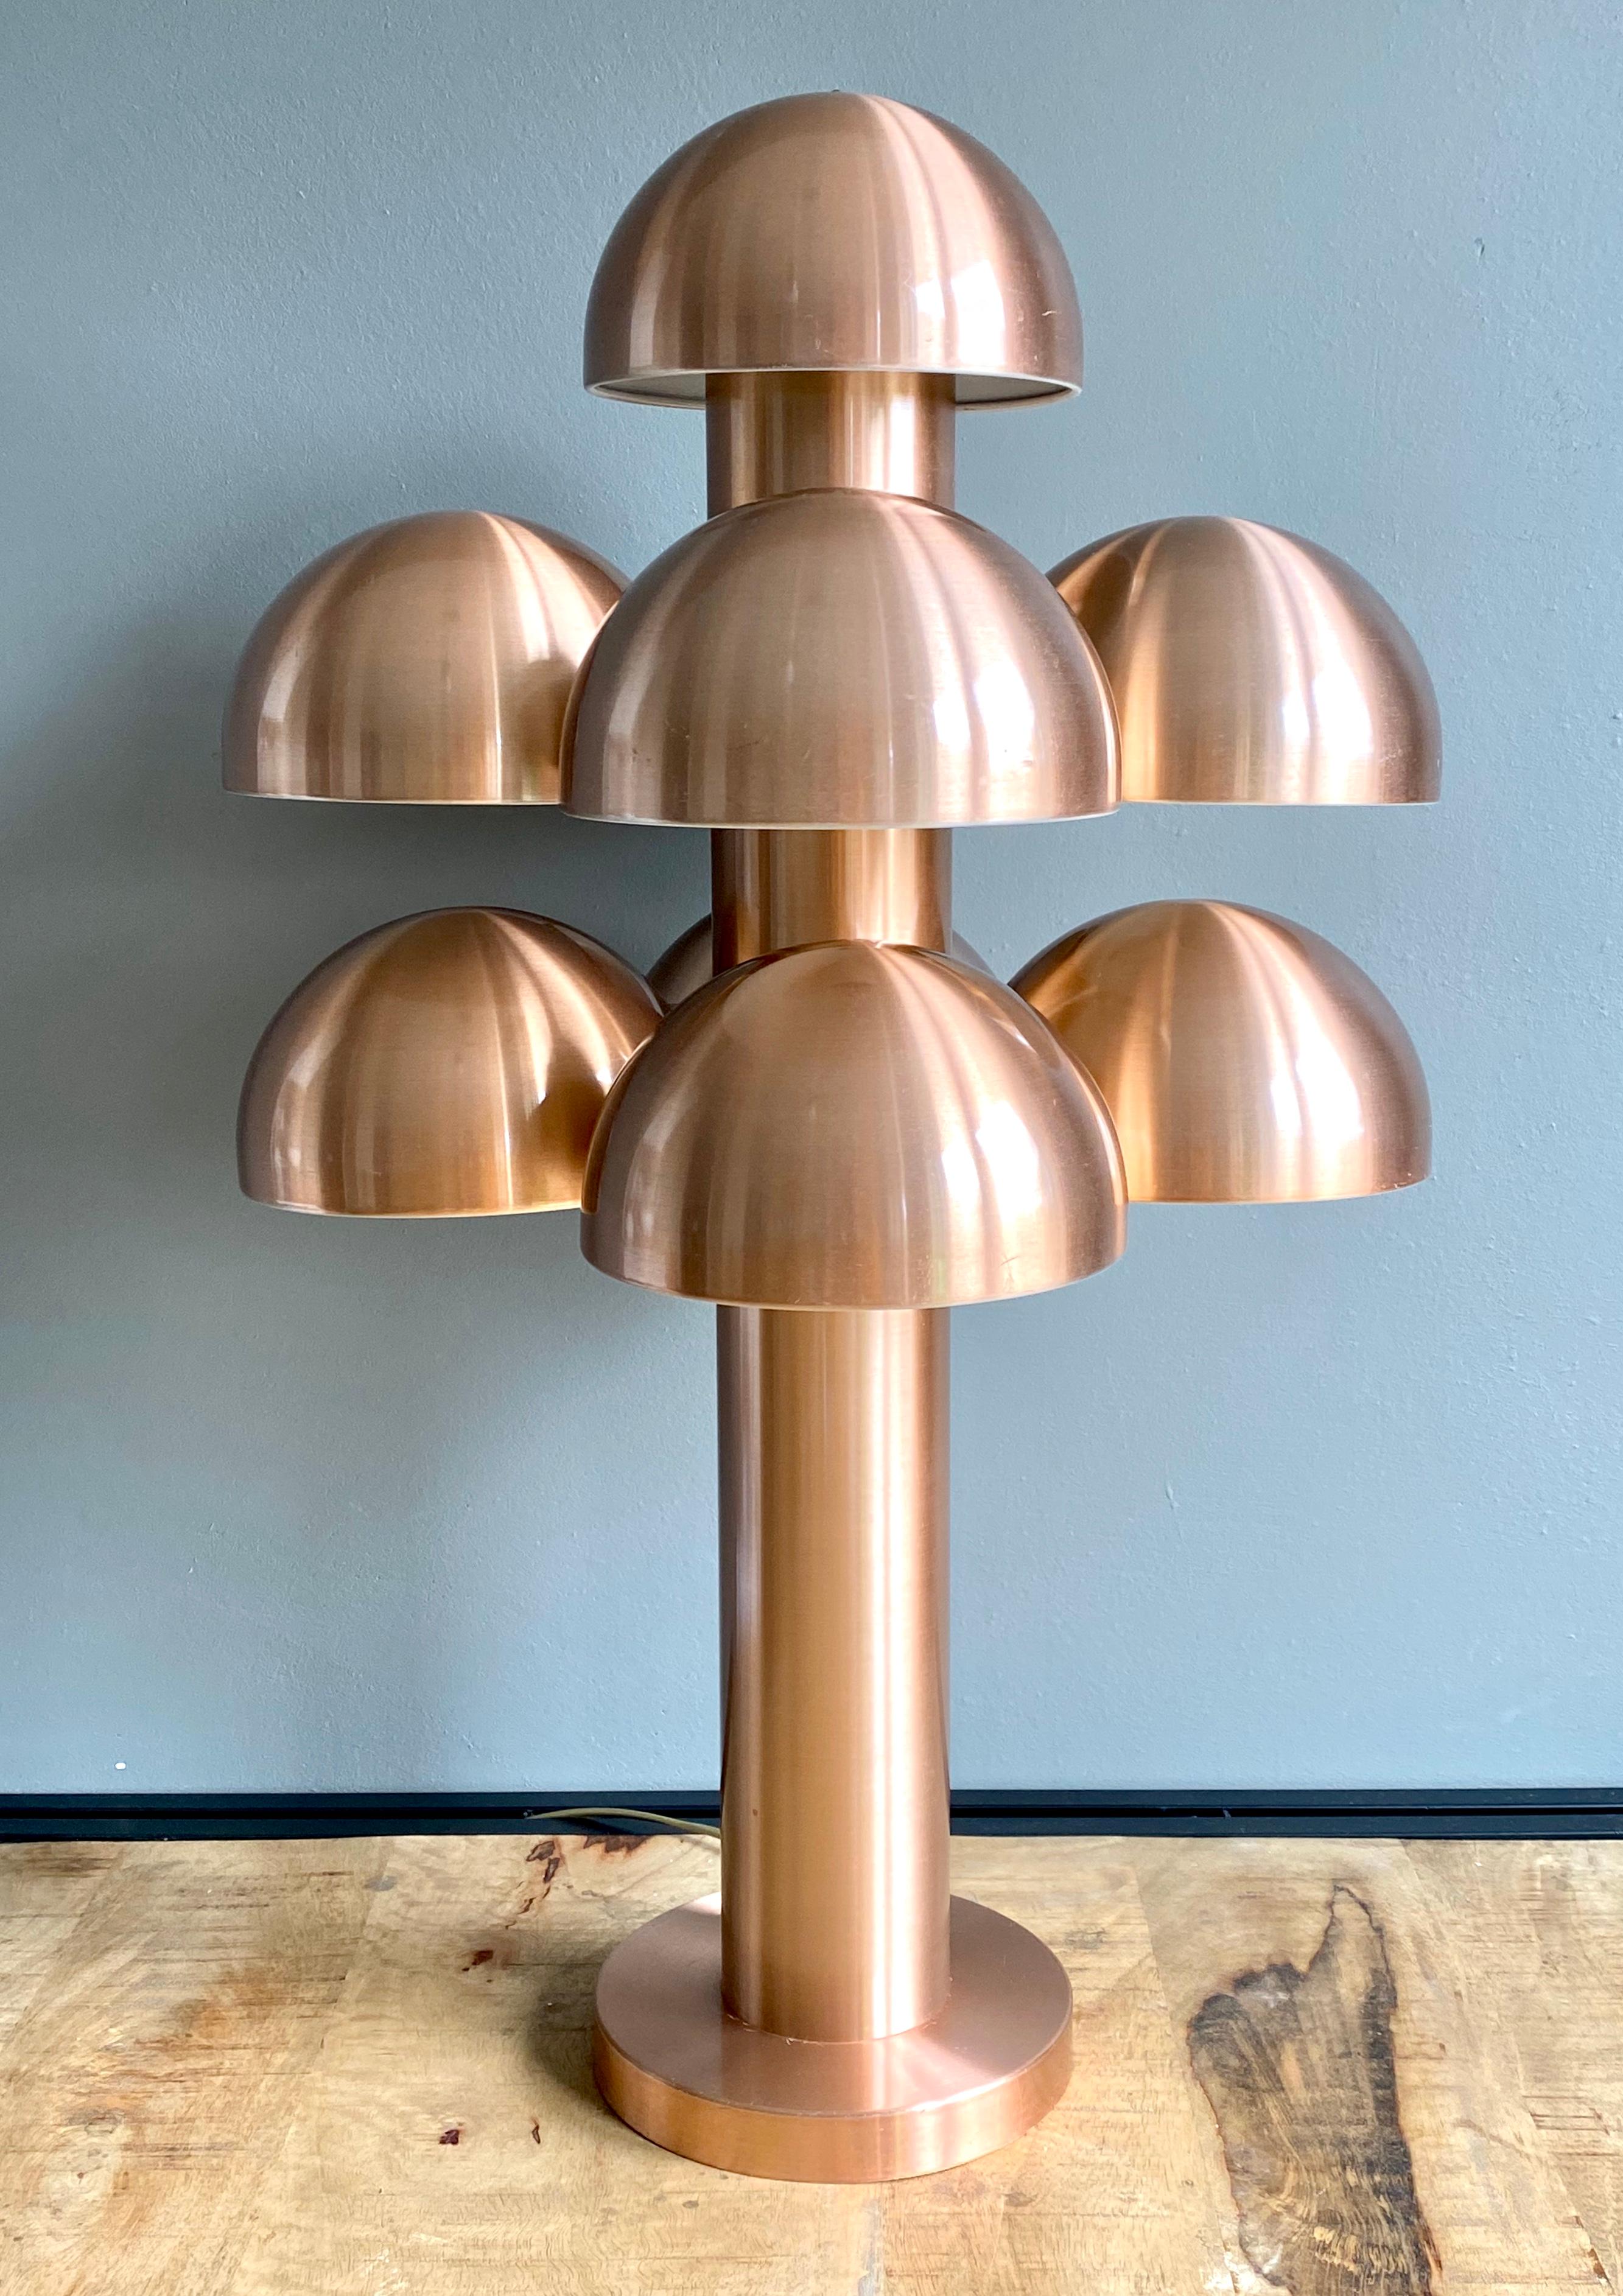 Outstanding piece with nine shades and Porselain sockets (E27). 
The Finnish Architect Maija Liisa Komulainen was obviously inspired by the Cantharelle Mushroom when she designed the piece for RAAK Amsterdam in the 1970s. It consists of anodized